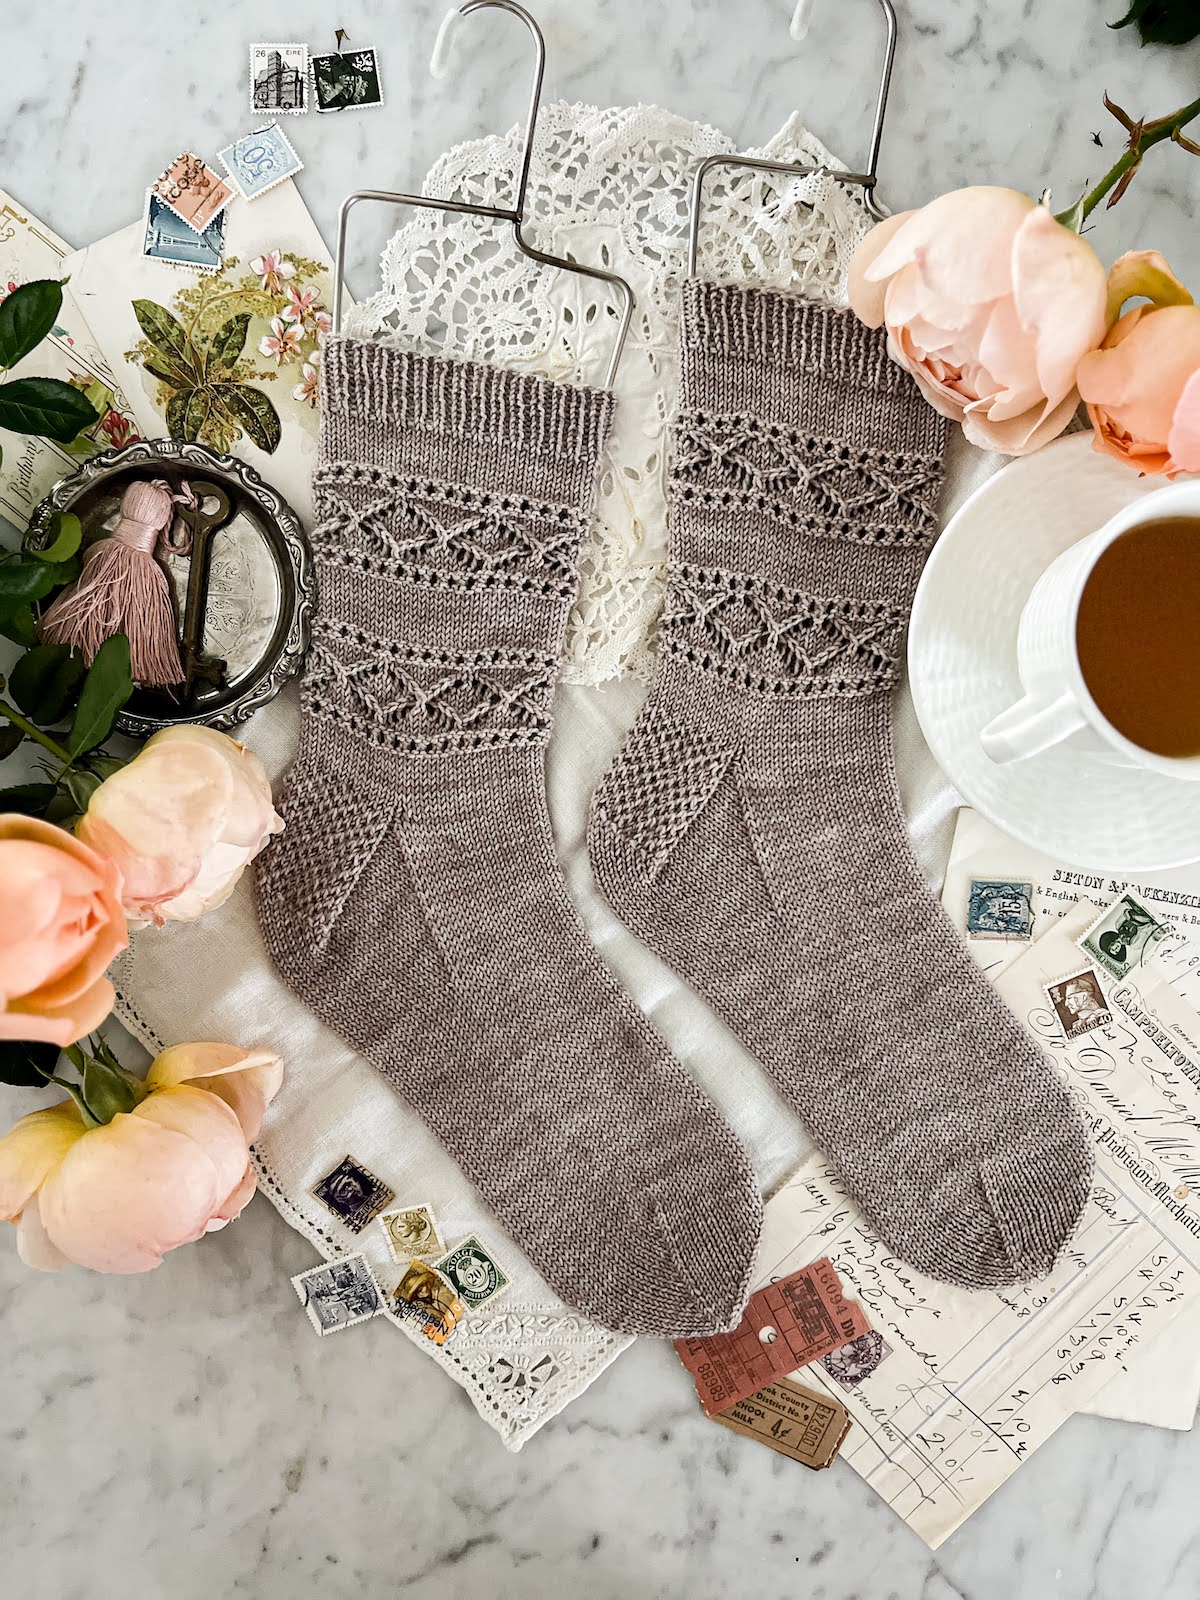 A flatlay photograph of two gray, handknit socks stretched on wire sock blockers. They have lacy bands around the legs and the toes are both pointing to the right. They're surrounded by peach roses and antique paper ephemera.